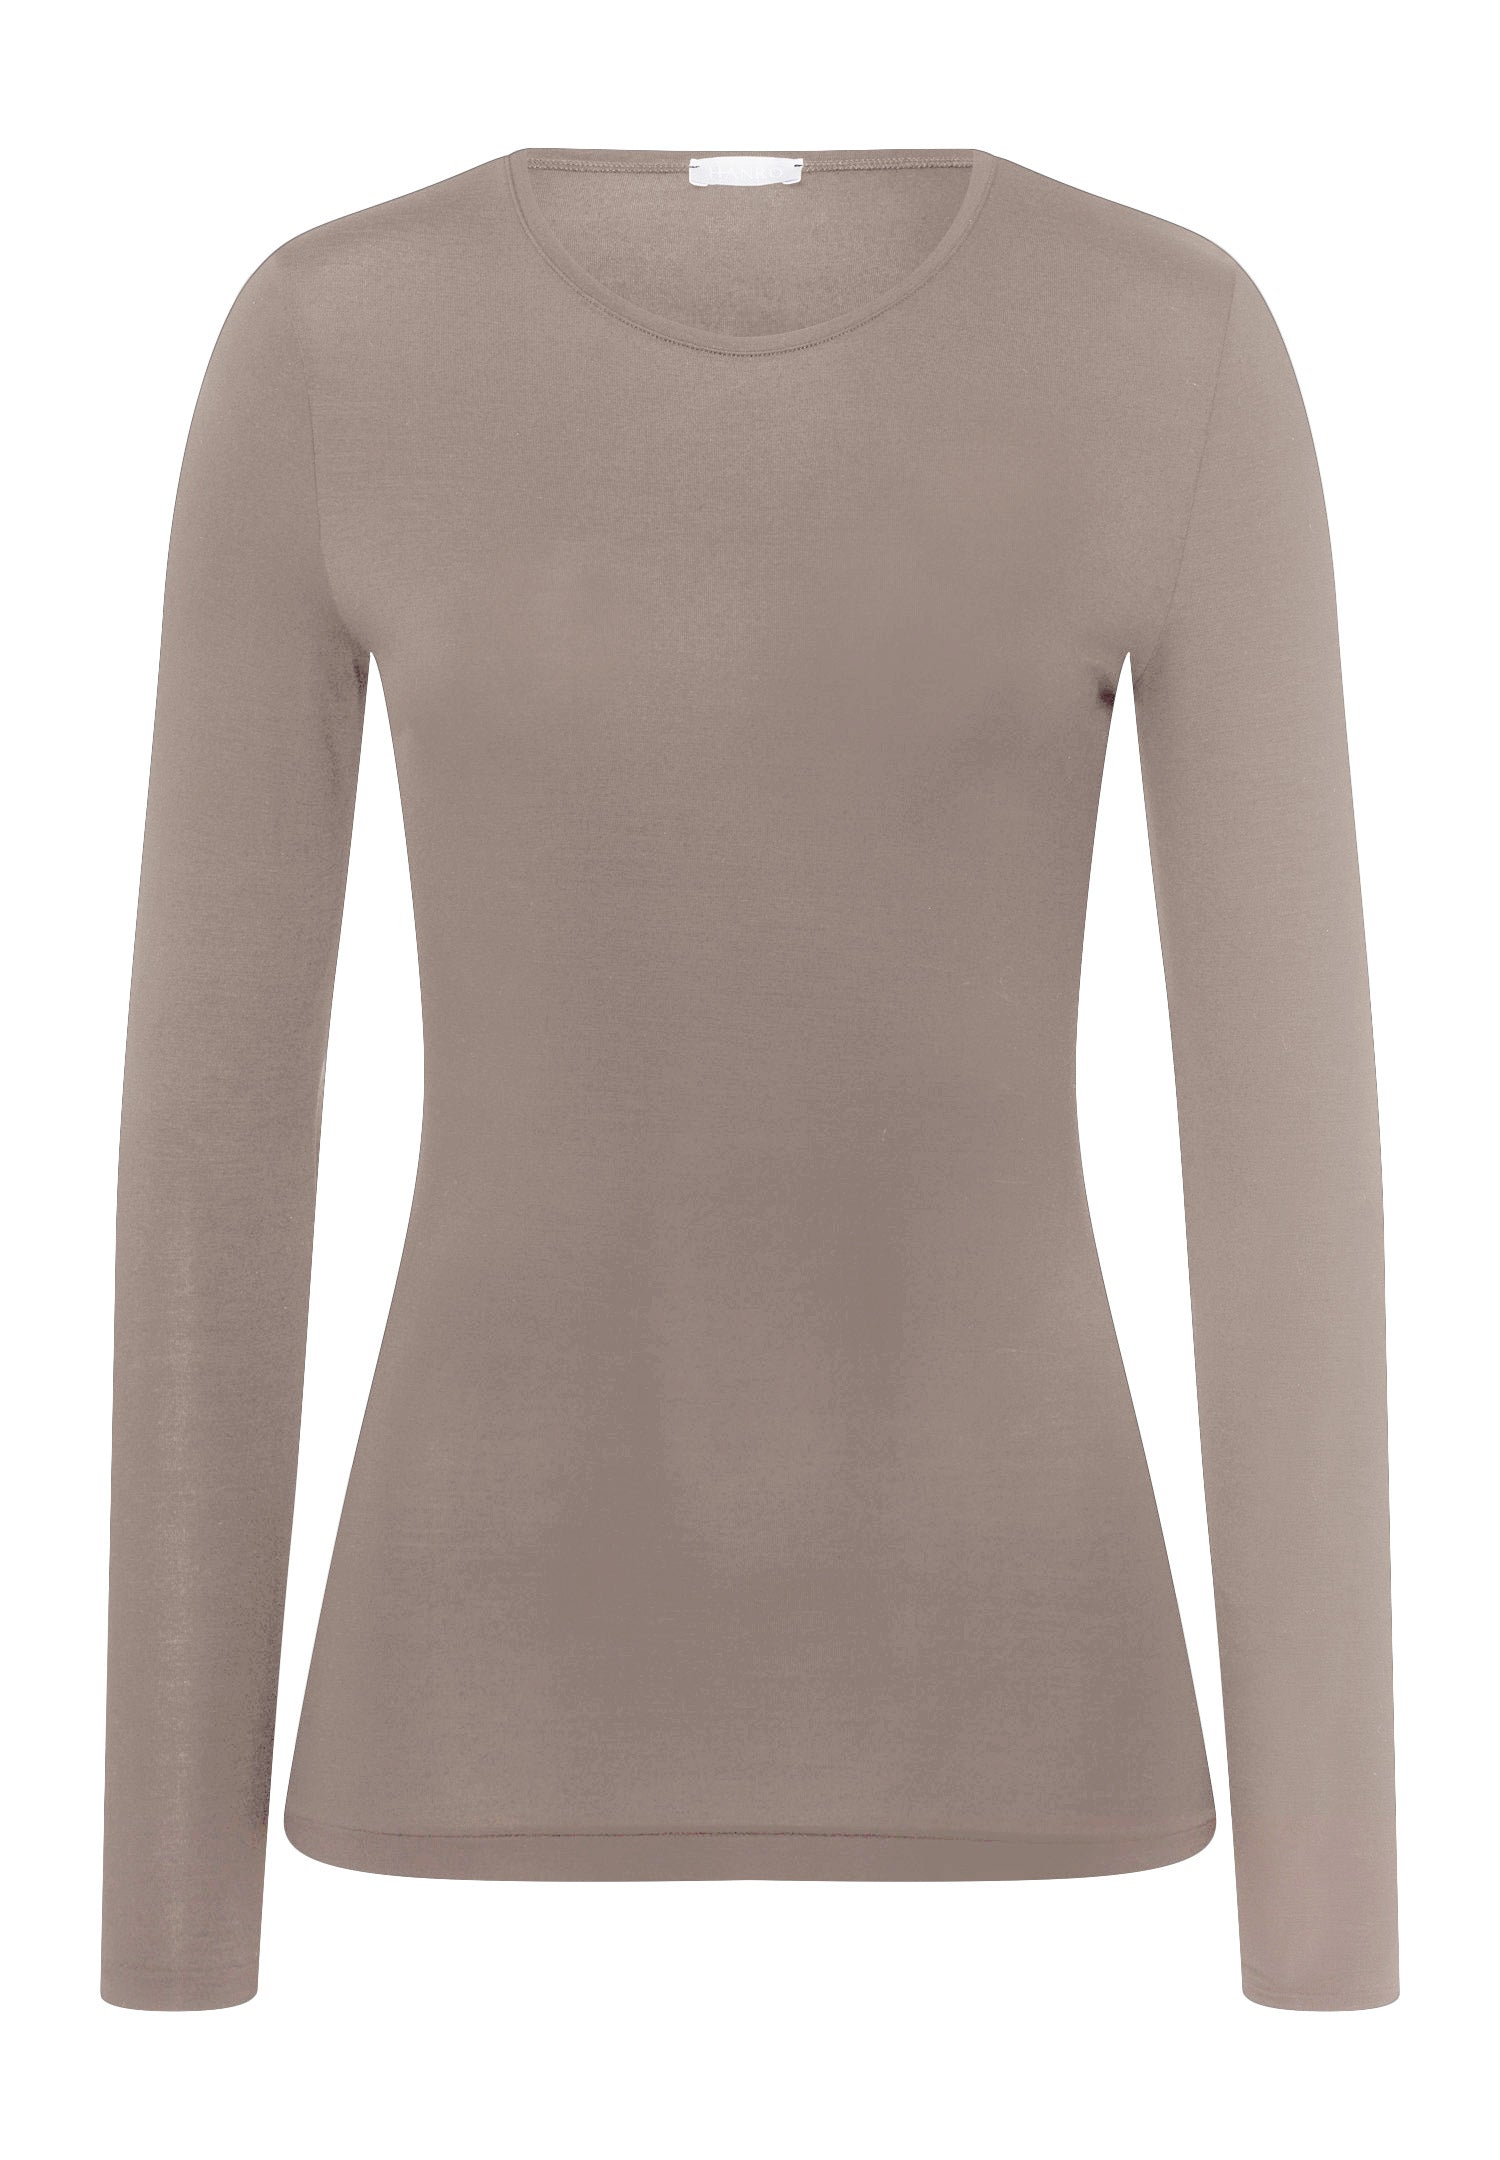 79069 Soft Touch Long Sleeve Top - 1825 Taupe Grey